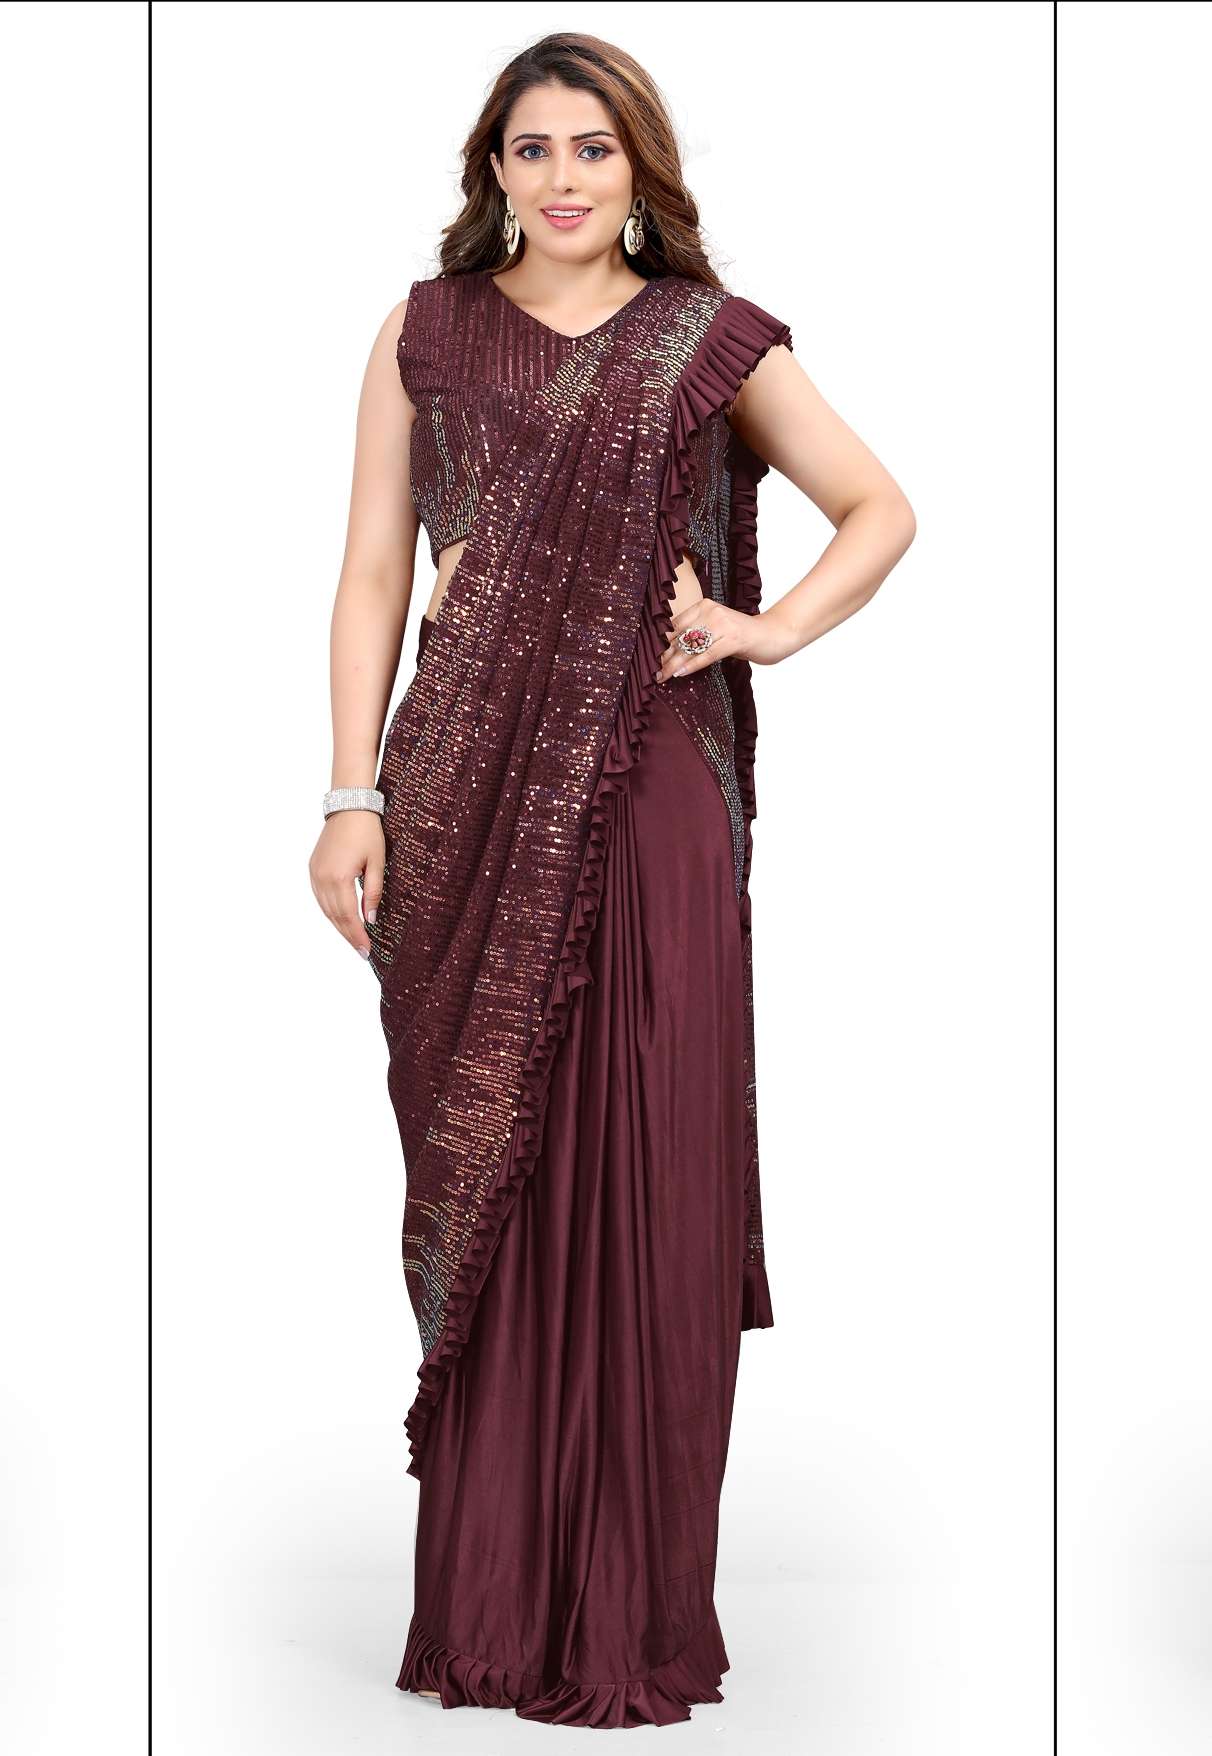 STYLISH COLLECTION OF READY TO WEAR SAREE COLLECTION